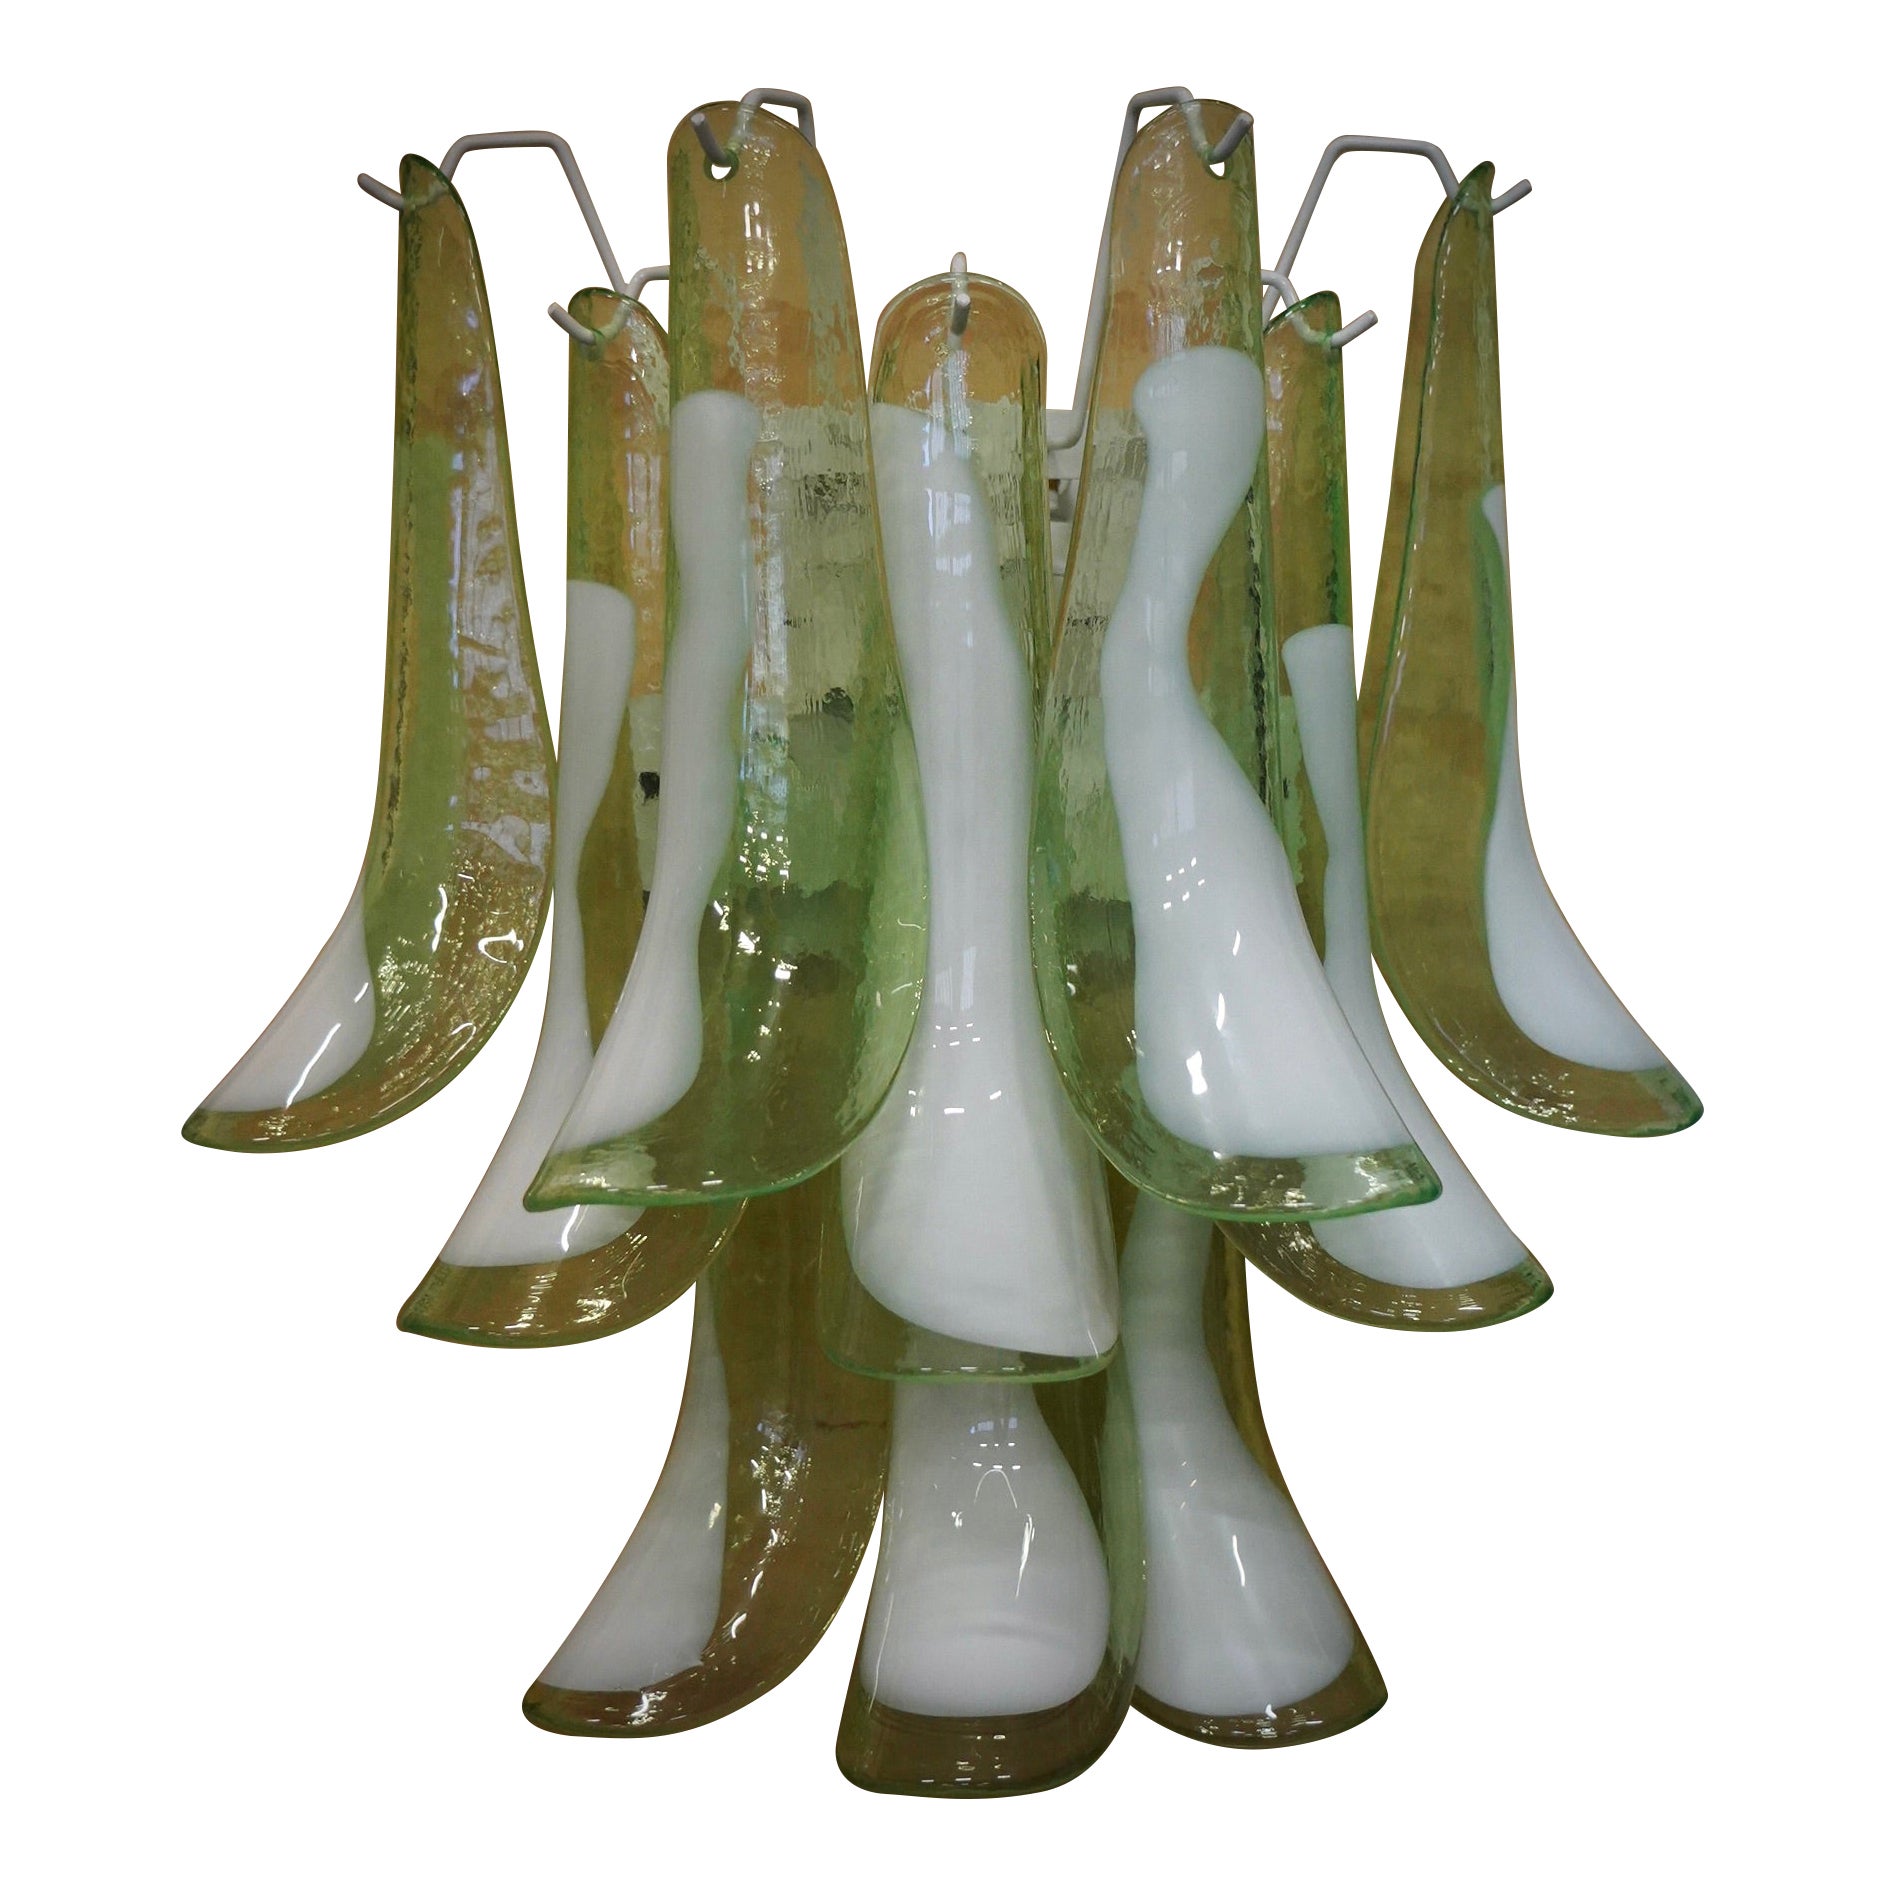 Mazzega Murano Green and White Art Glass Midcentury Wall Lights Sconces, 1990 For Sale